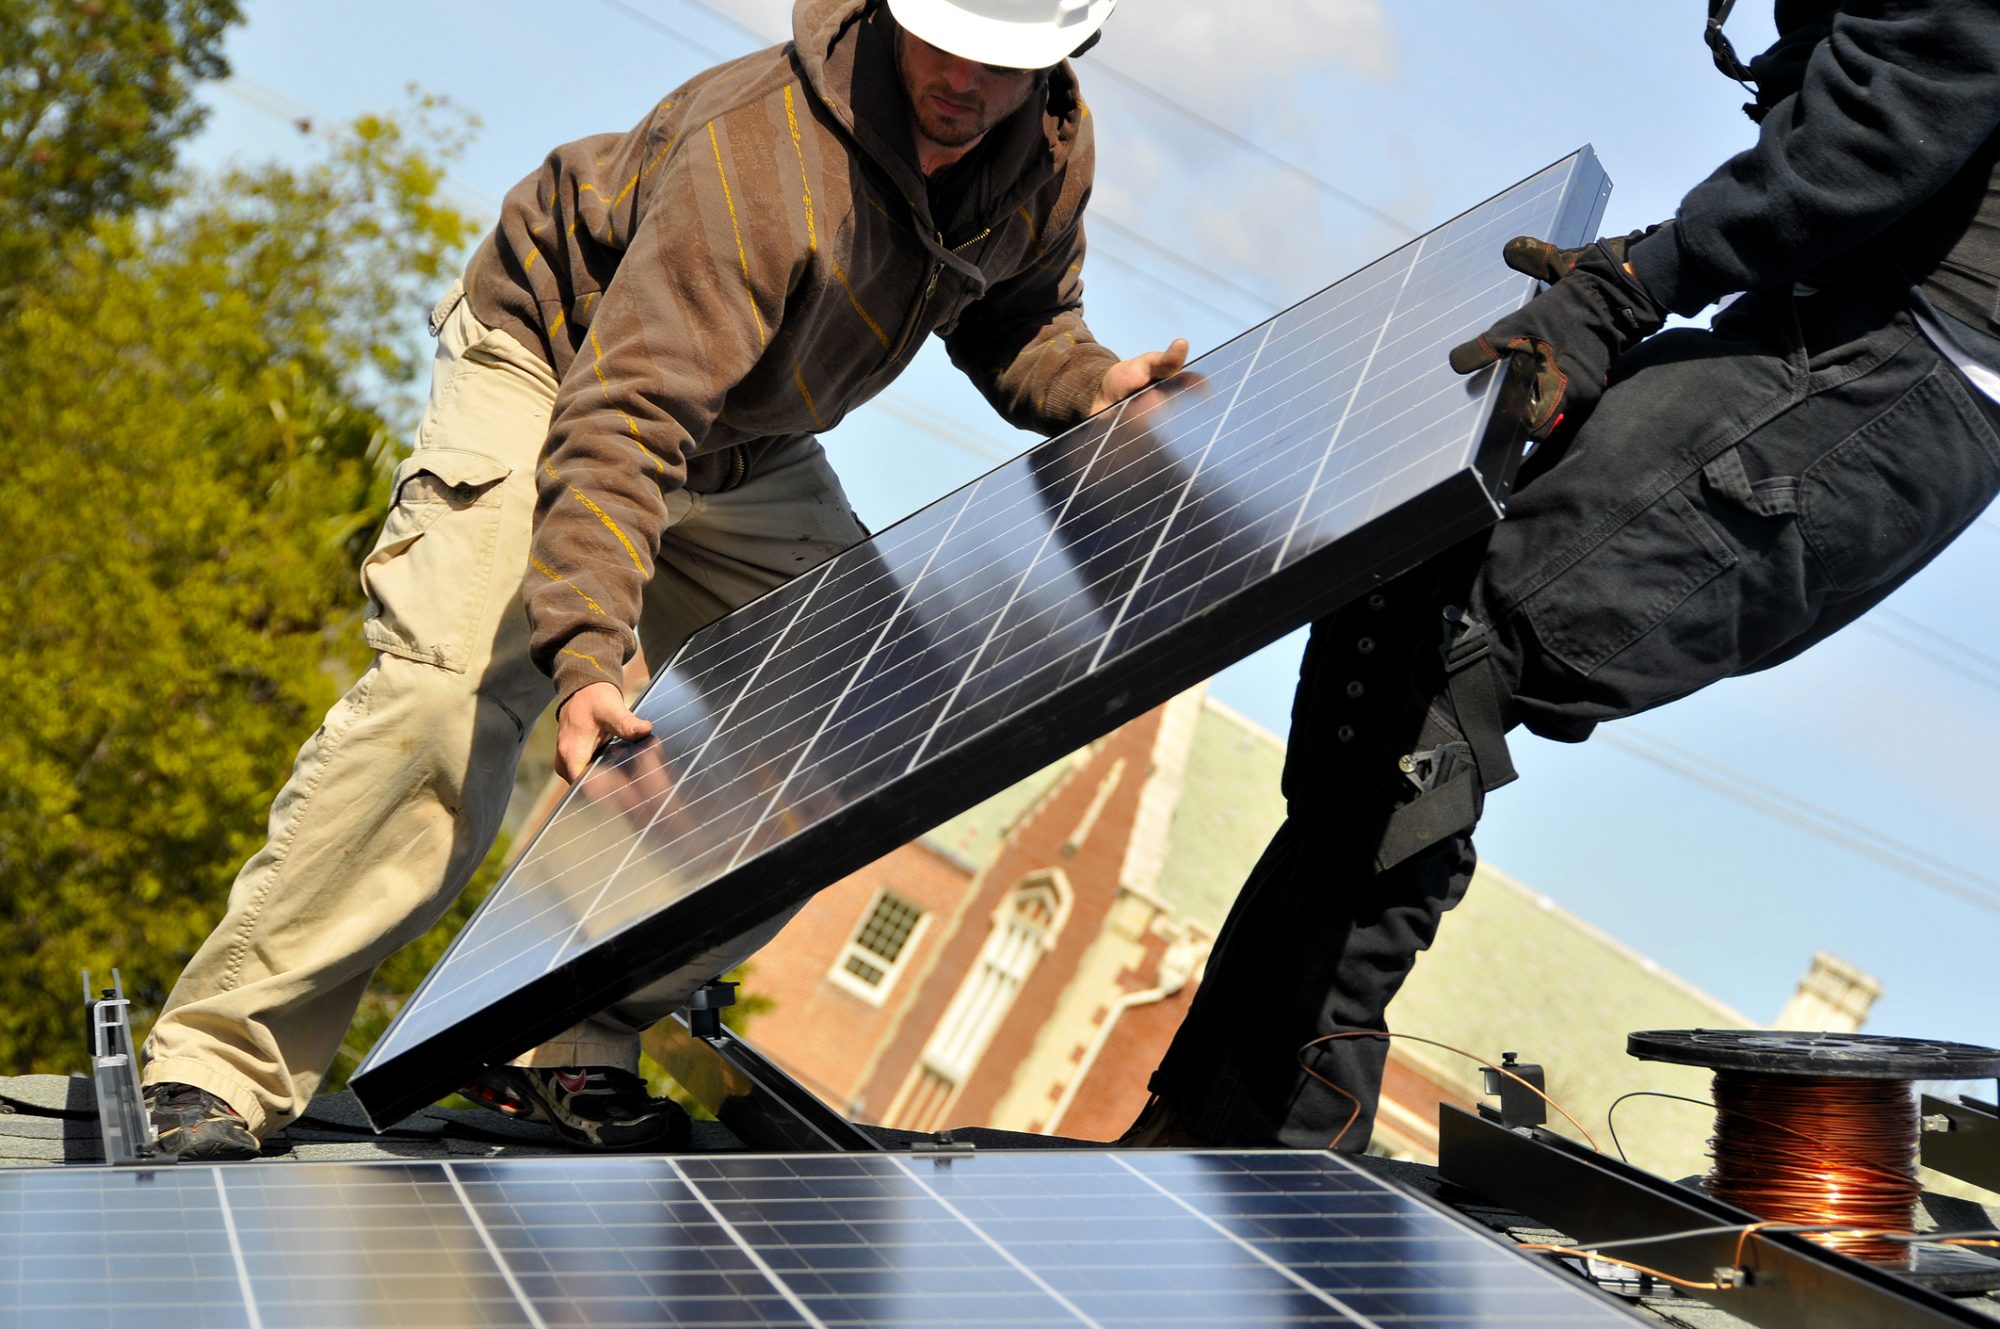 Installing Photovoltaic Solar Panels on Residential Roof